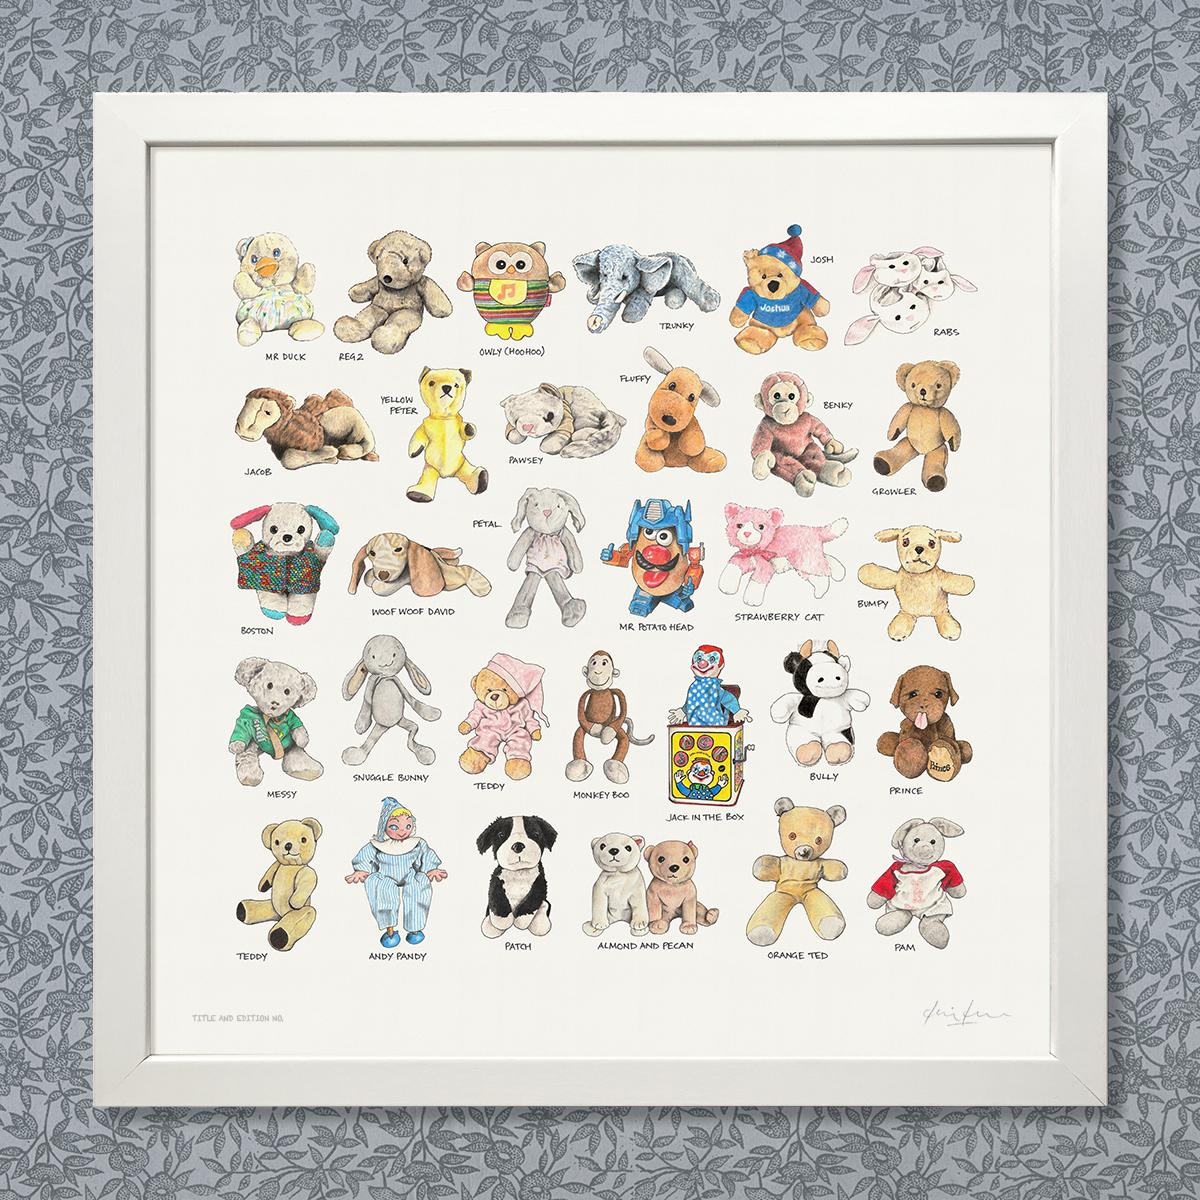 Limited edition montage print of sketches in pen, ink and coloured pencil of much loved toys, in a white frame.